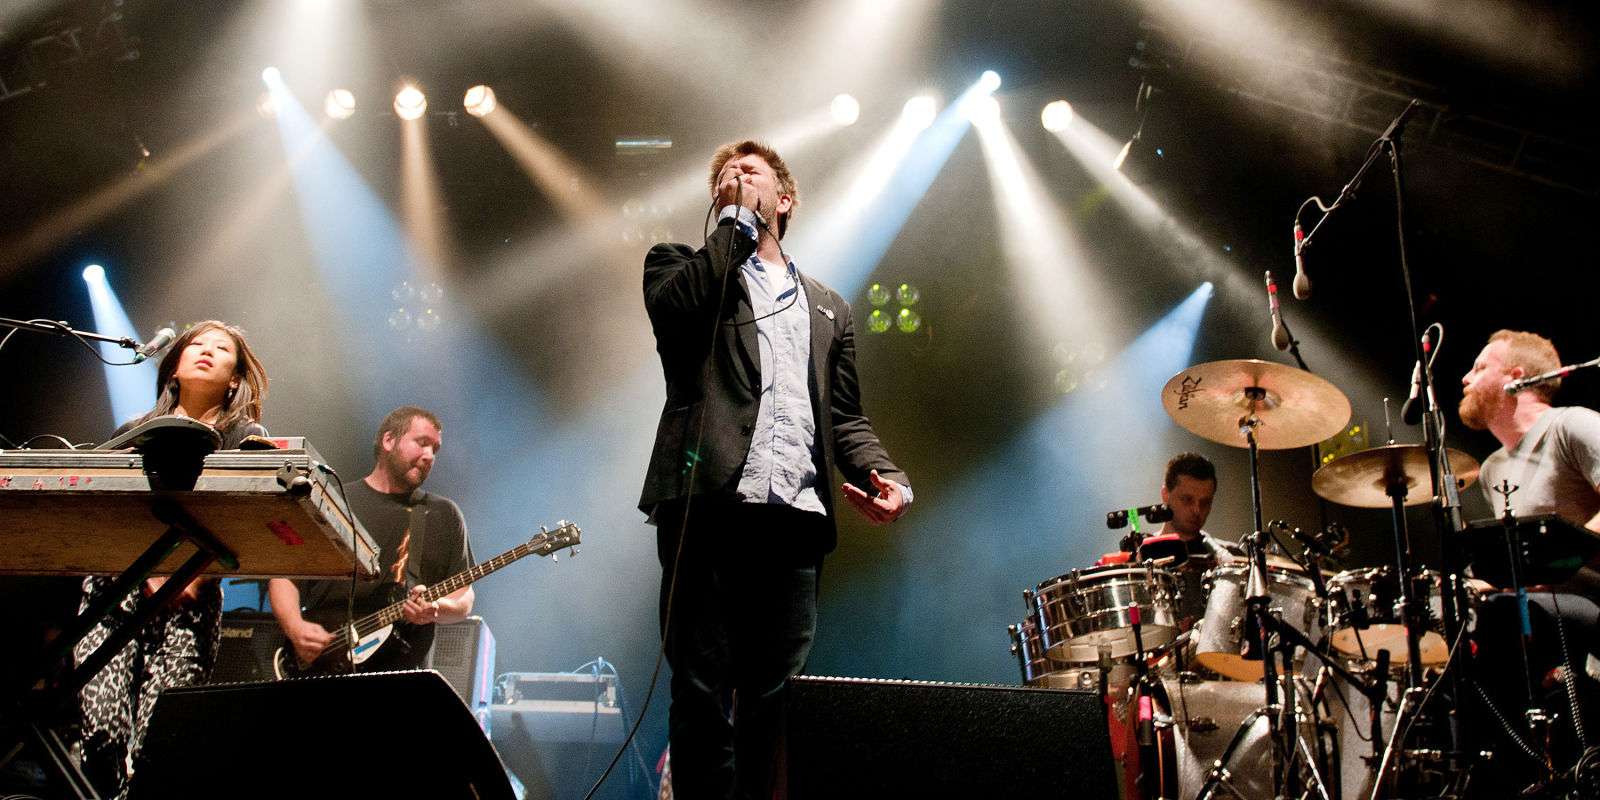 LCD Soundsystem have just been added to the Clockenflap roster.